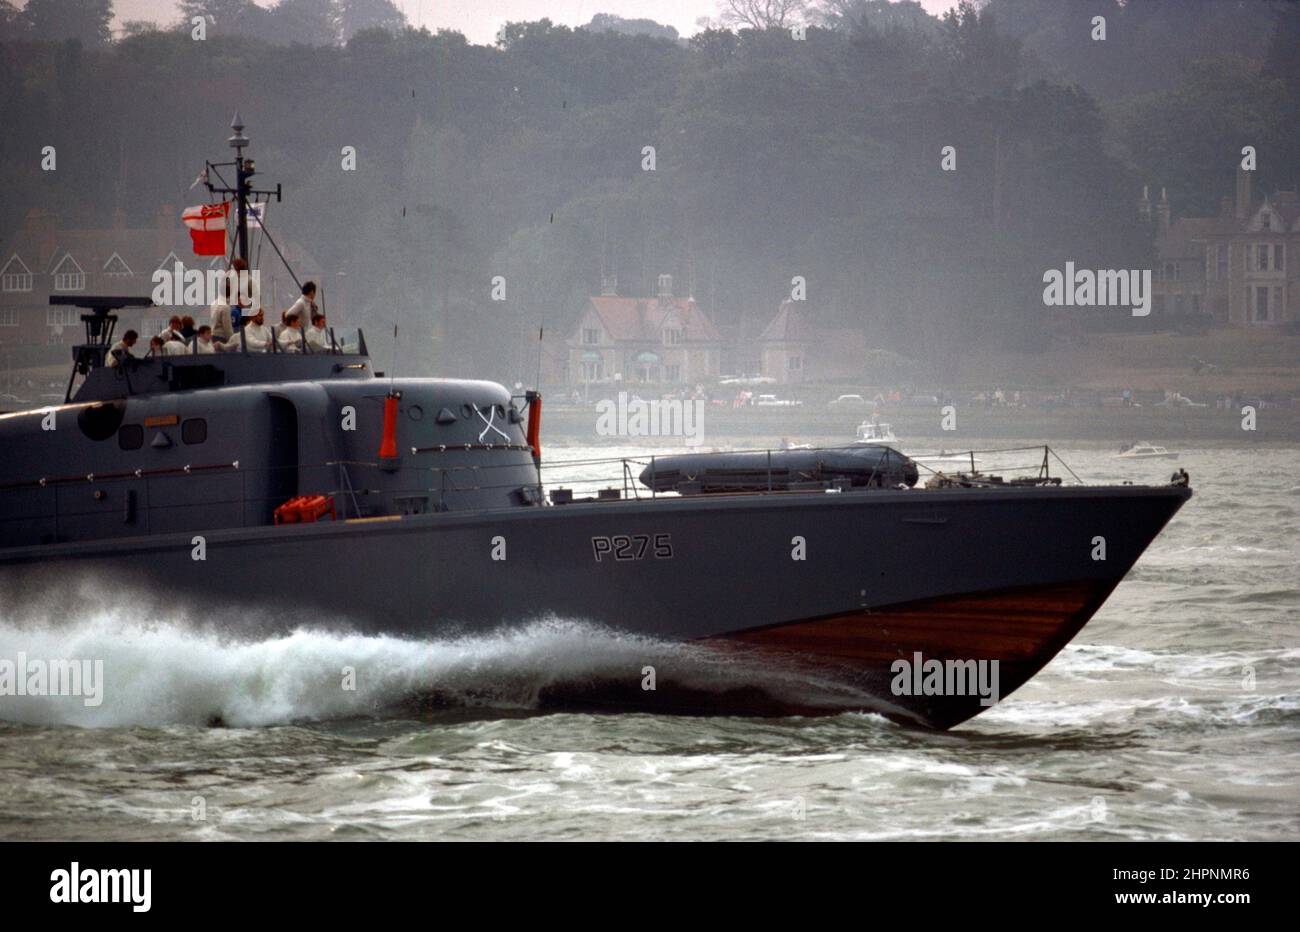 AJAXNETPHOTO. 1976. COWES, ENGLAND. - FTB GUARDSHIP - HMS SABRE AT FULL SPEED AT THE START OF THE COWES TORQUAY COWES POWERBOAT RACE FOR WHICH THE SHIP ACTED AS GUARDSHIP ON THE COURSE.PHOTO:JONATHAN EASTLAND/AJAX REF:911071001 Stock Photo